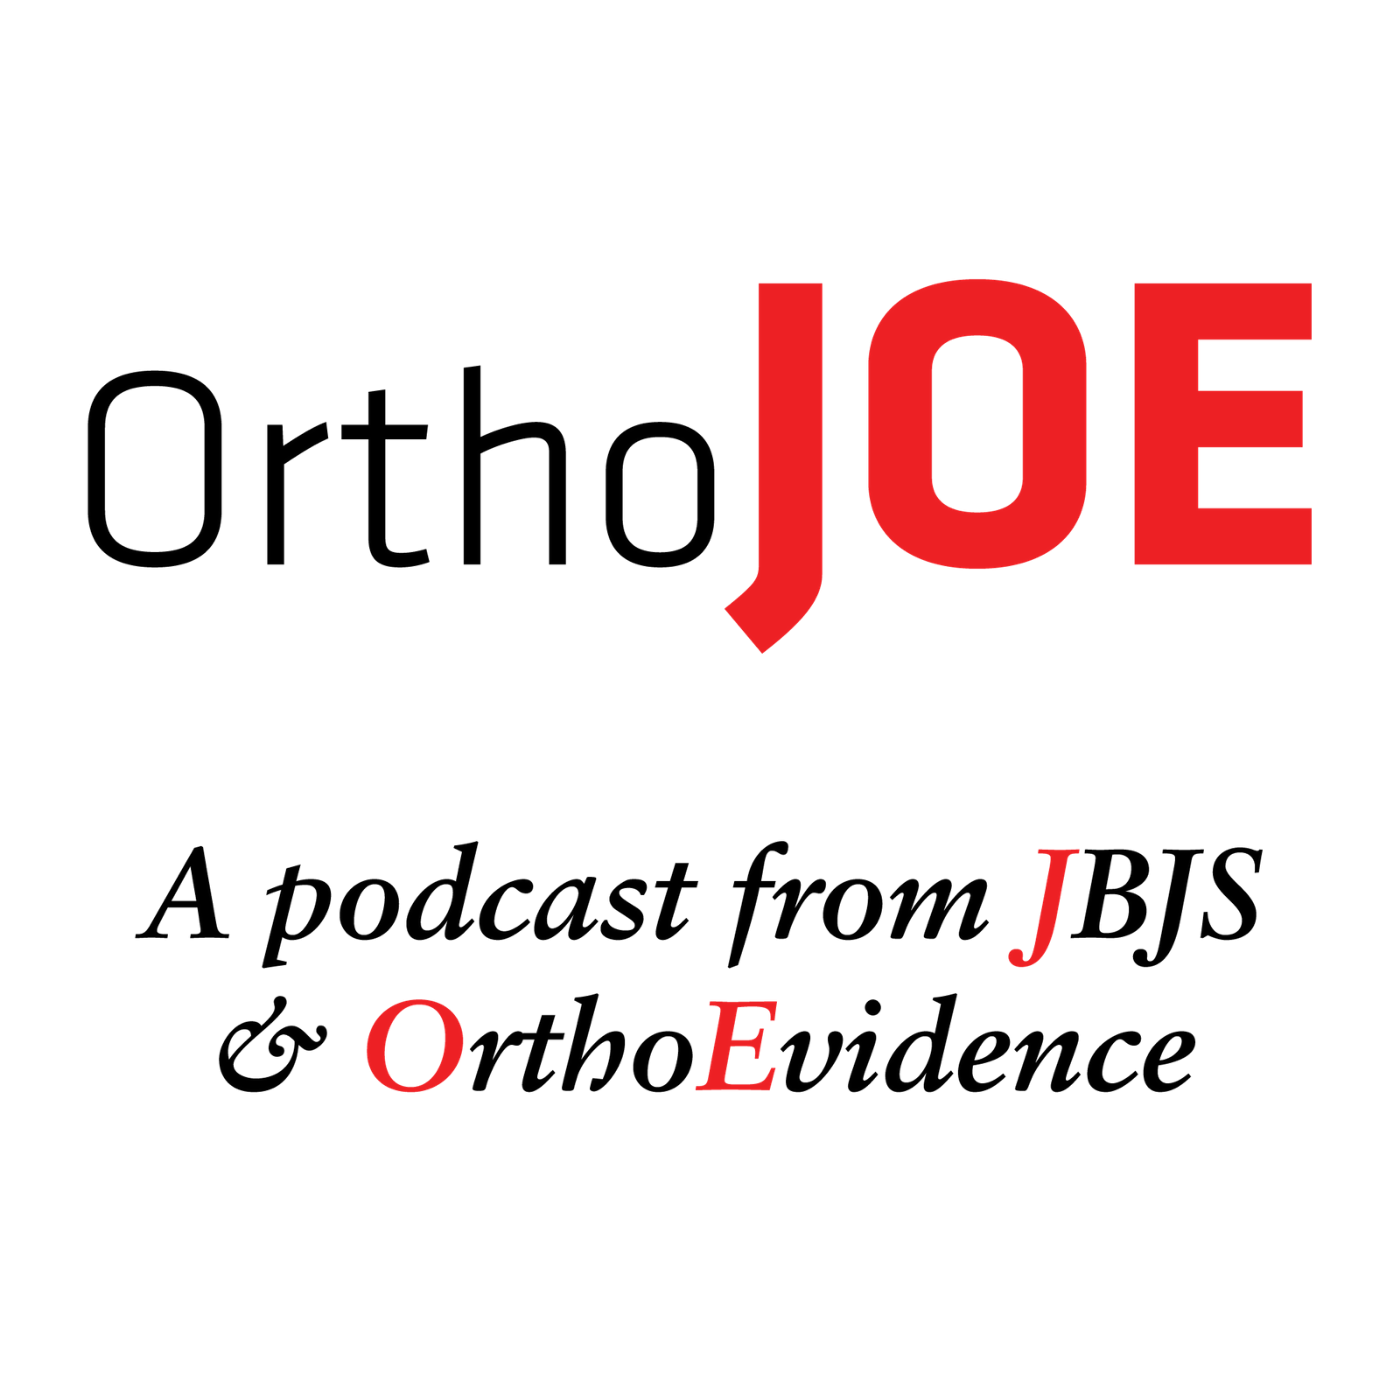 International Consensus in Orthopaedic Care (with special guest Javad Parvizi)